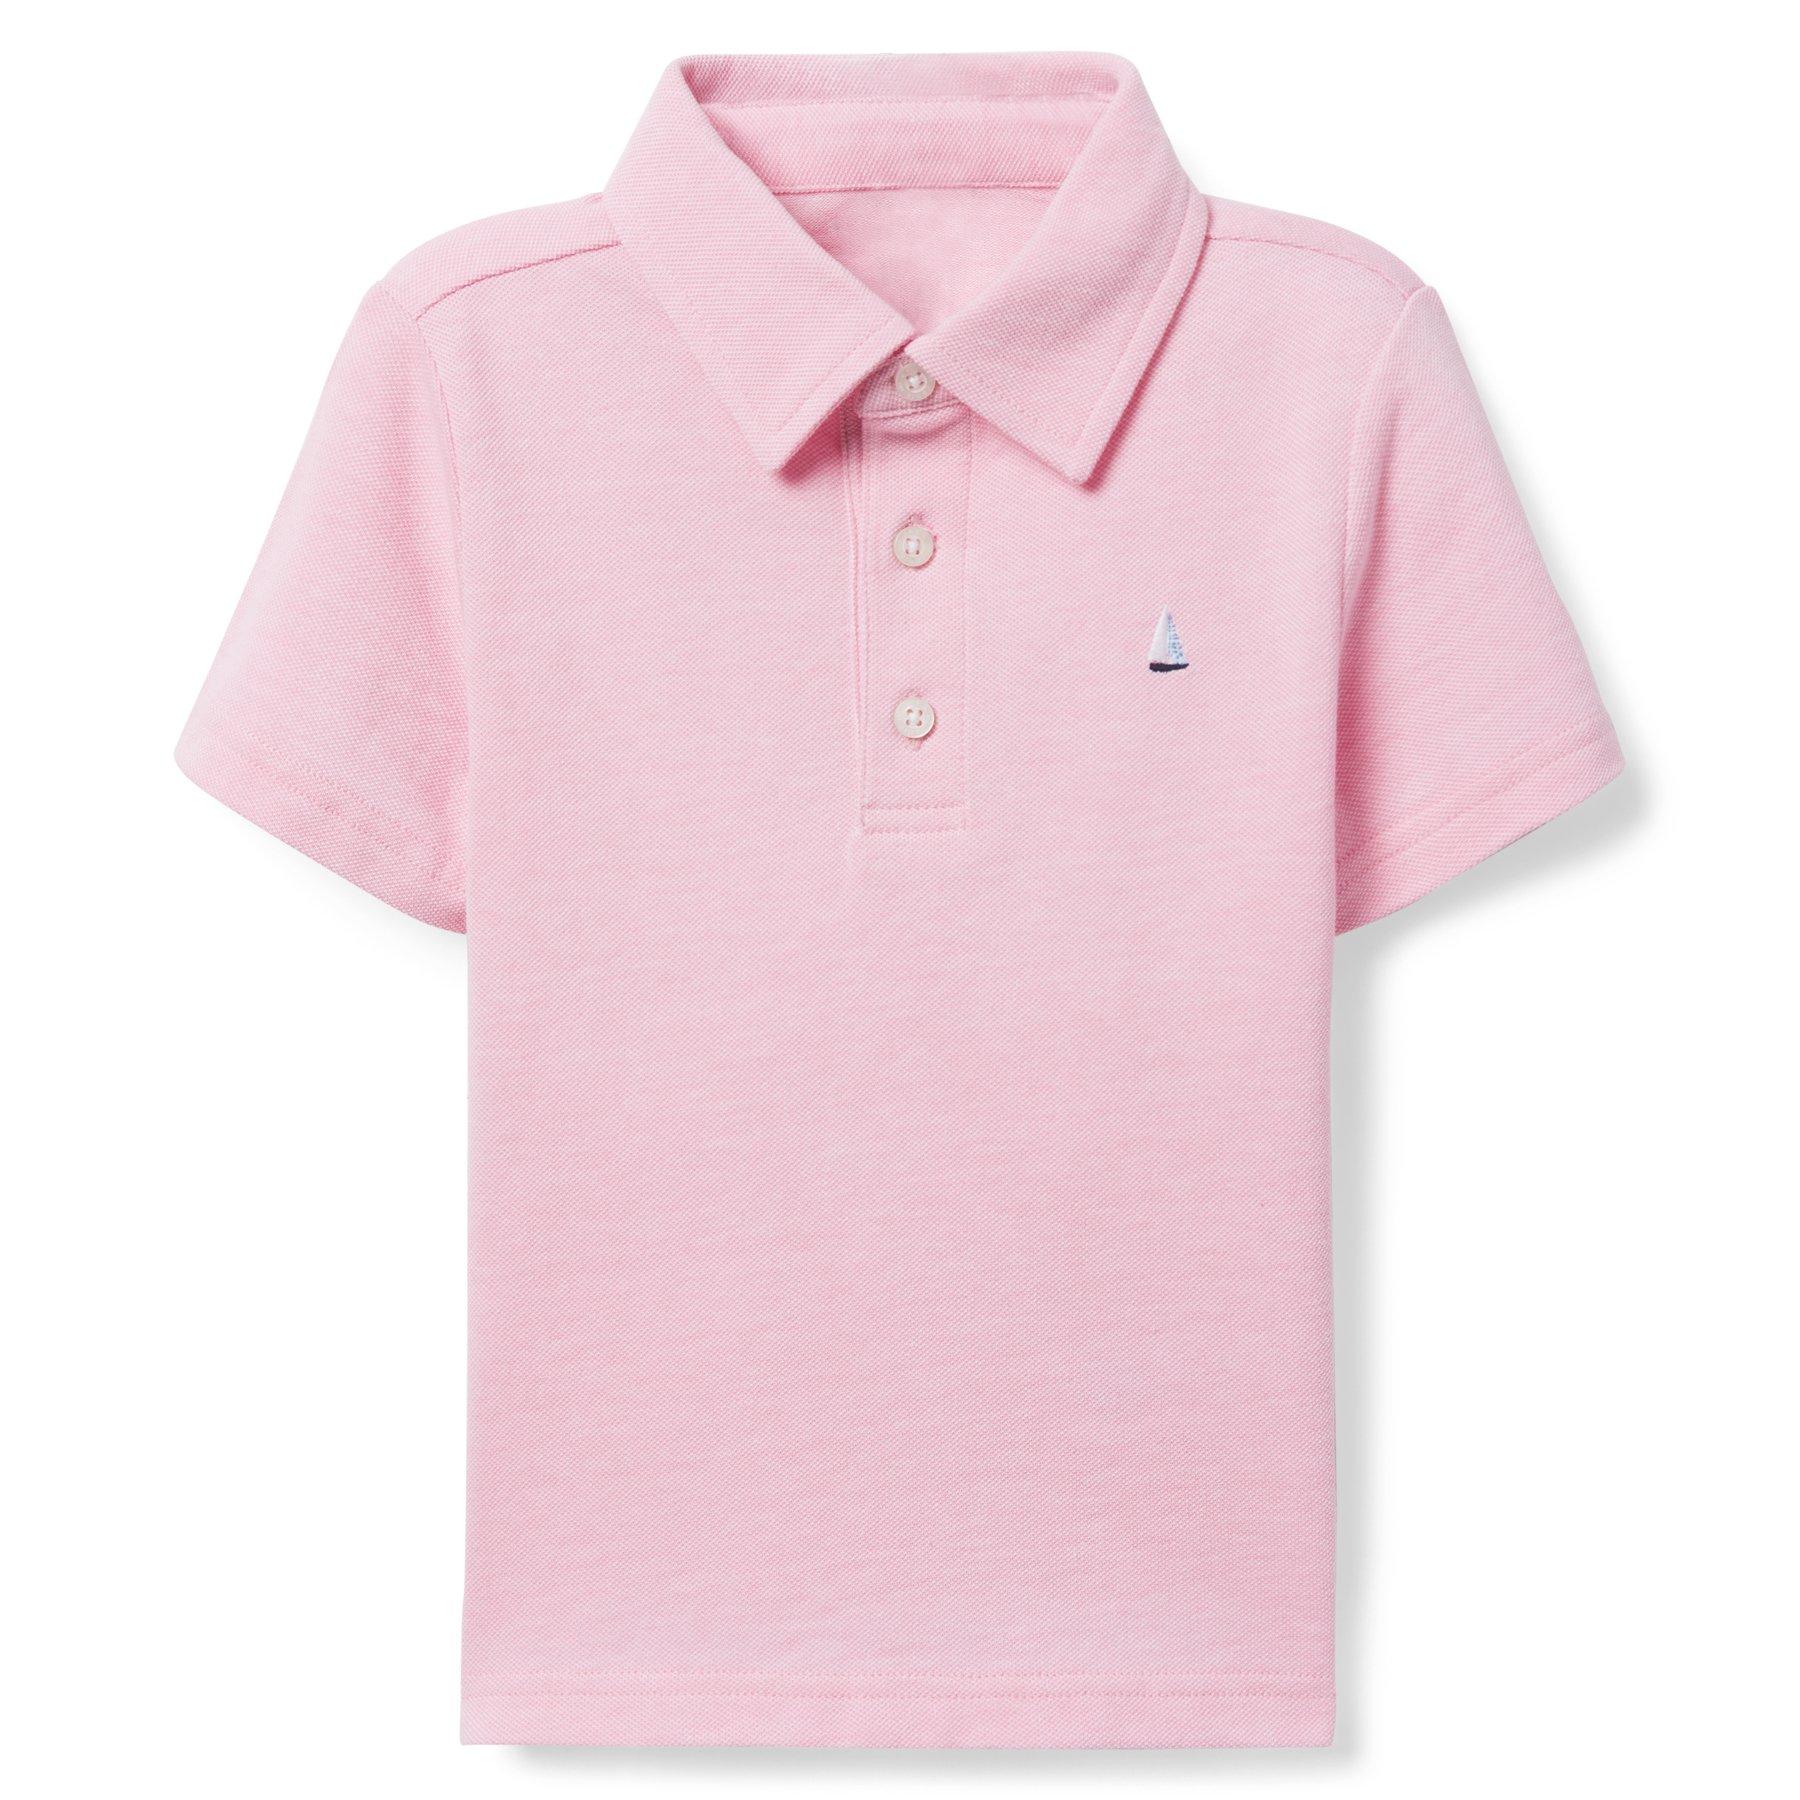 Janie And Jack Girl's Embroidered Pique Polo